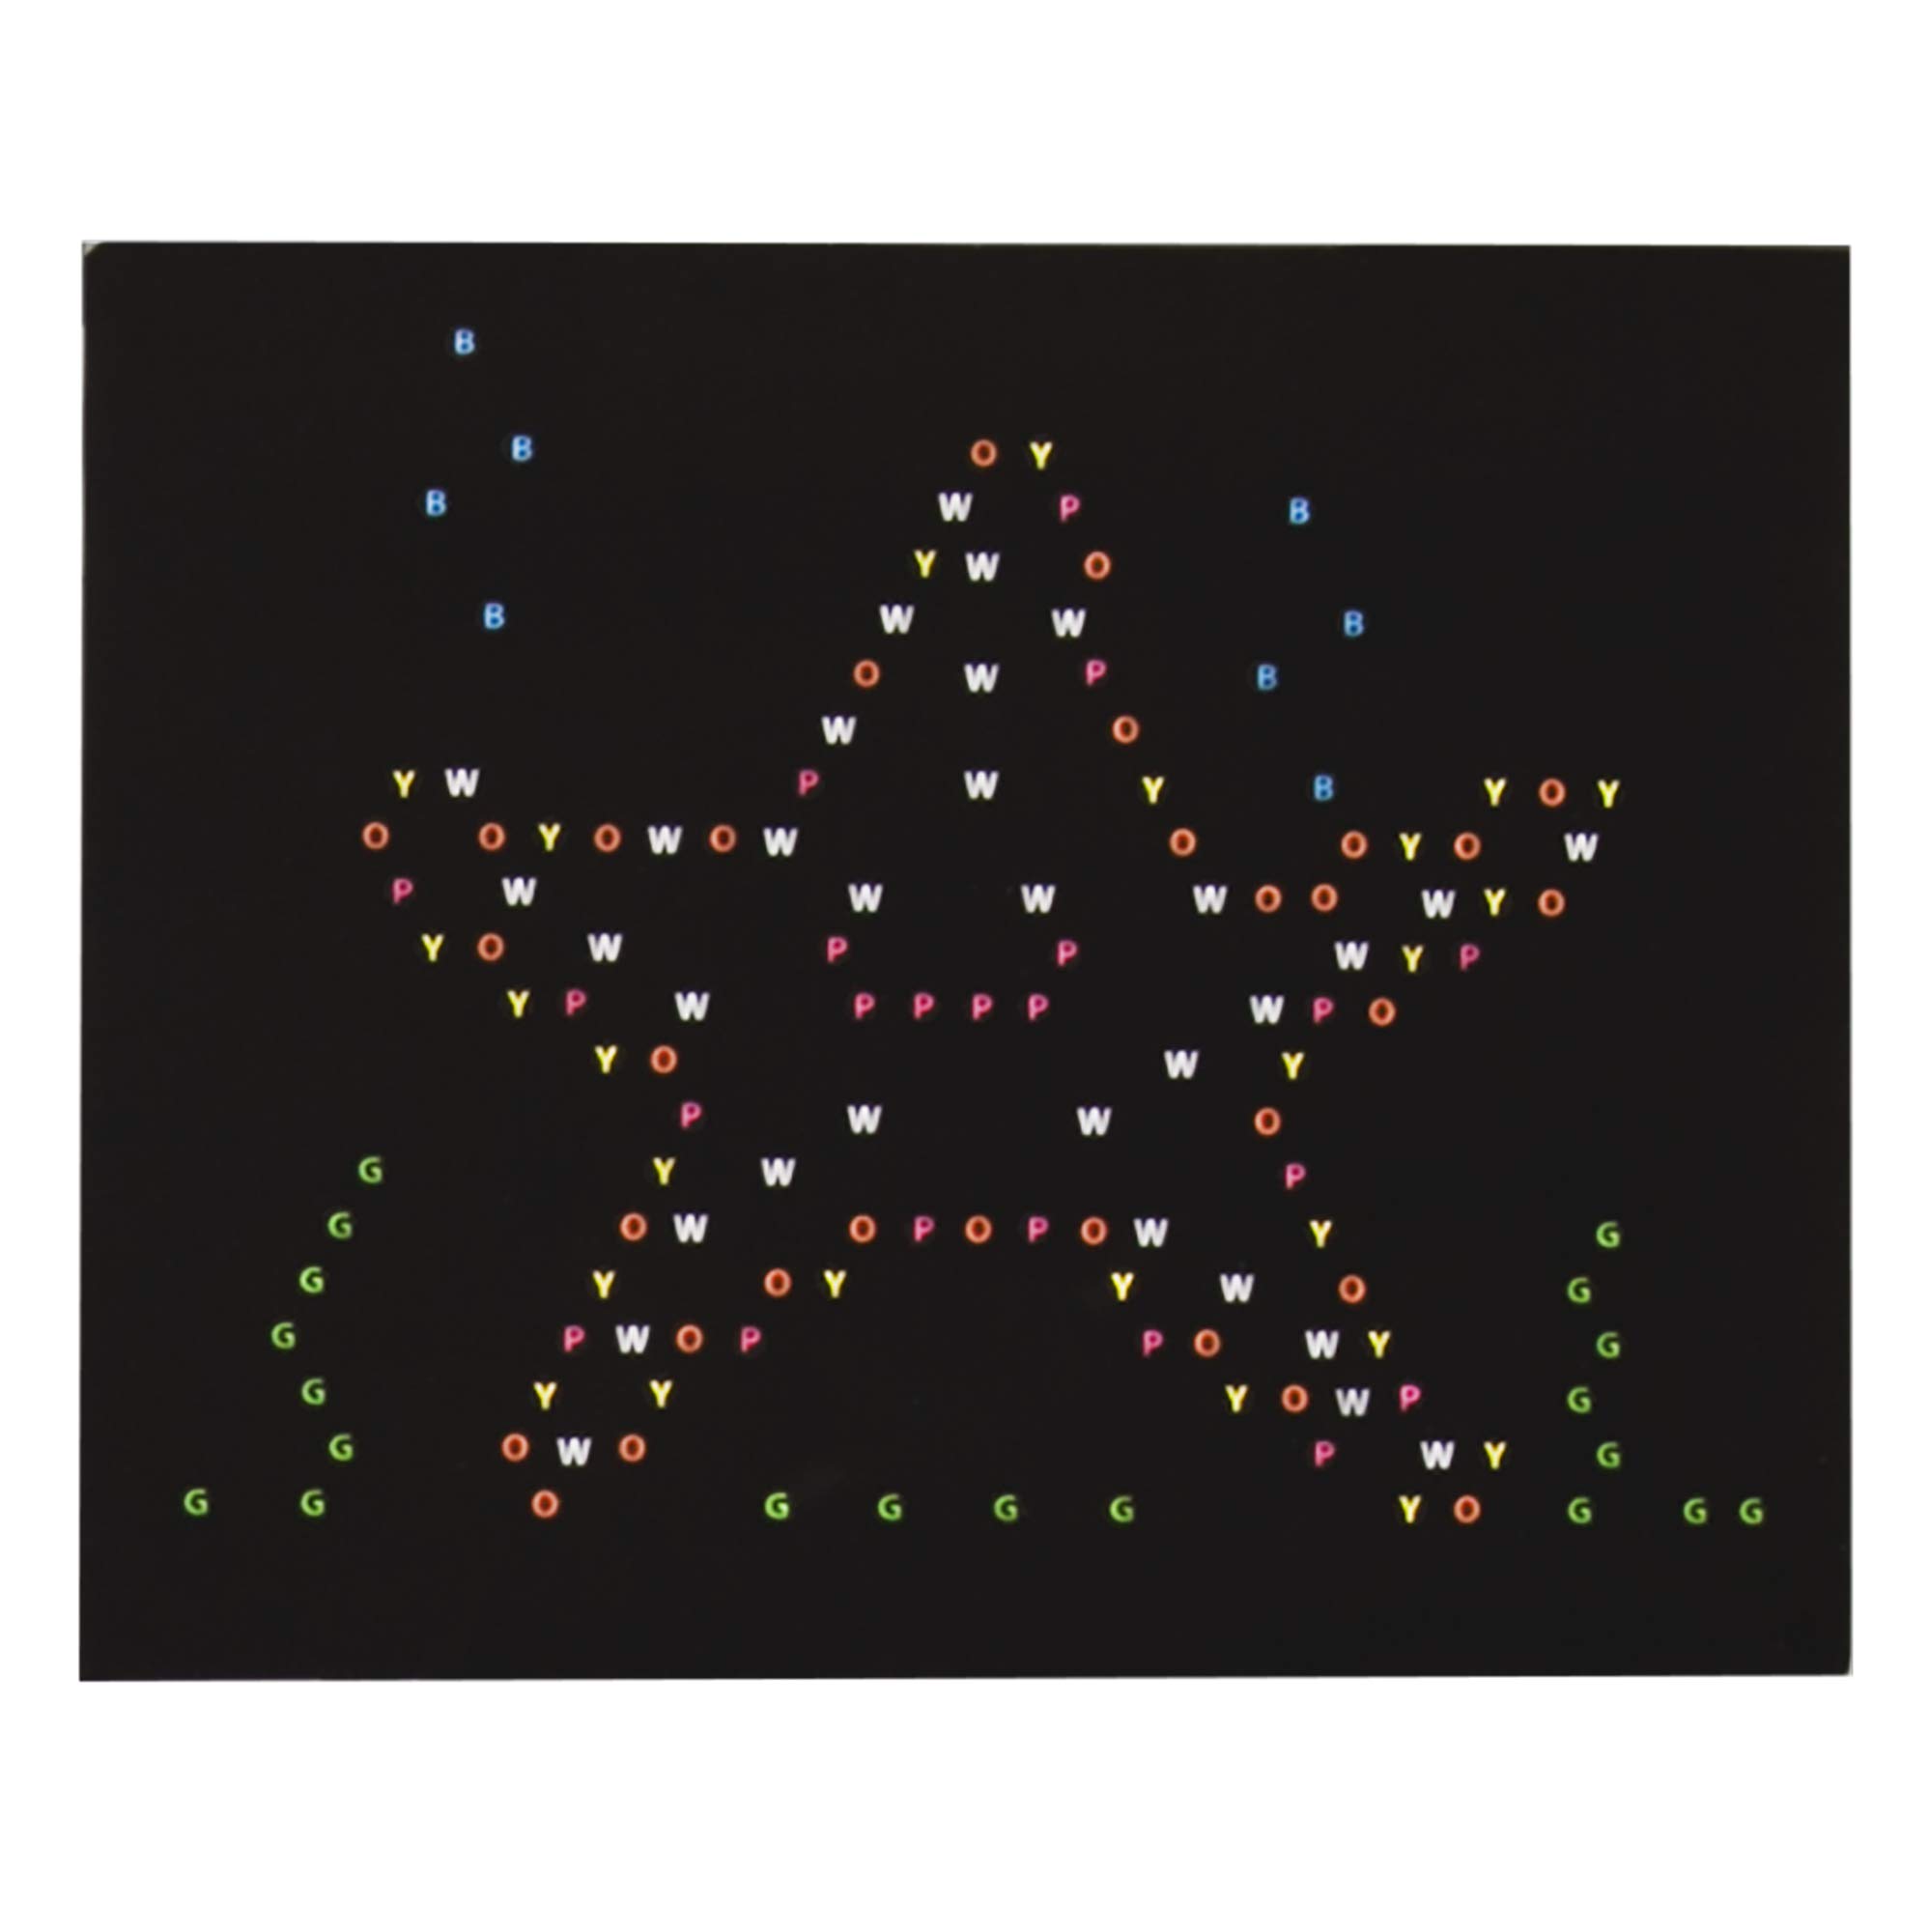 Lite Brite Ultimate Classic Refill Pack - Animal Theme - 10 Reusable Templates - Amazon Exclusive , Black, for ages 4 - 15 years